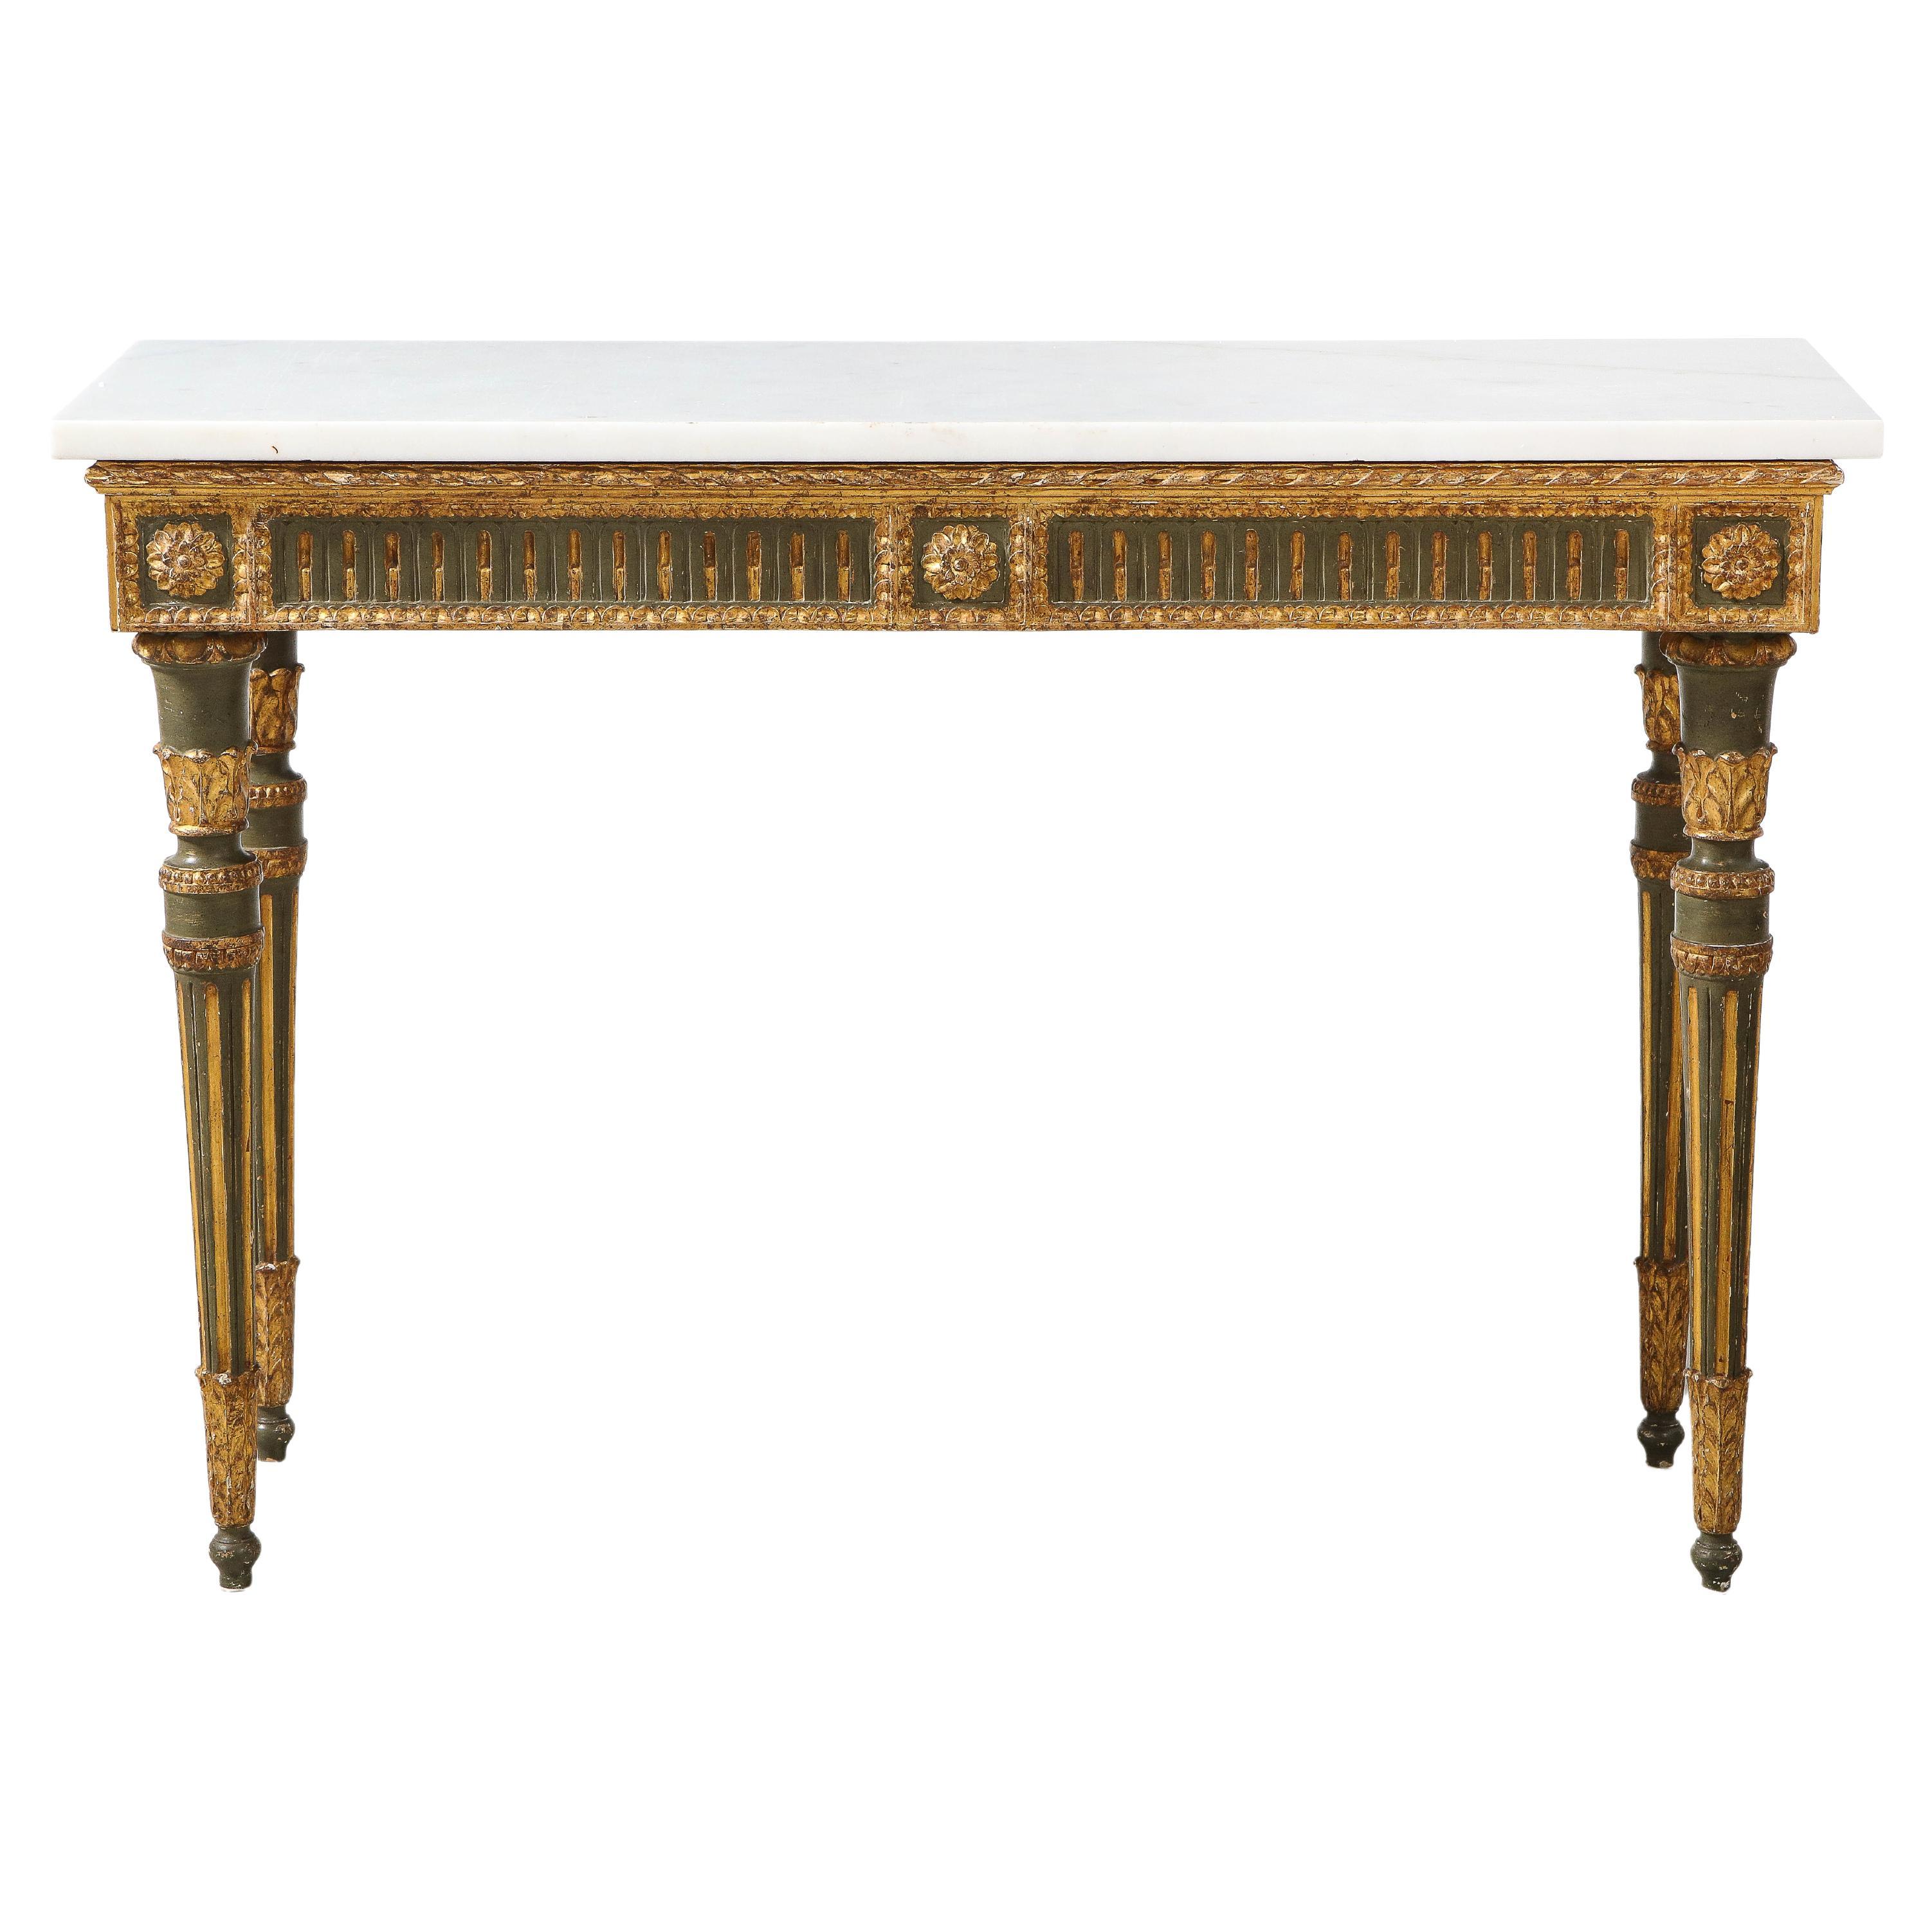 An exquisite and elegant Florentine 18th century Louis XVI period carved, painted and gilded wood neoclassical console table, with Carrara white marble top. The rectangular frieze is decorated on the front and sides with carved and gilded flutes, on